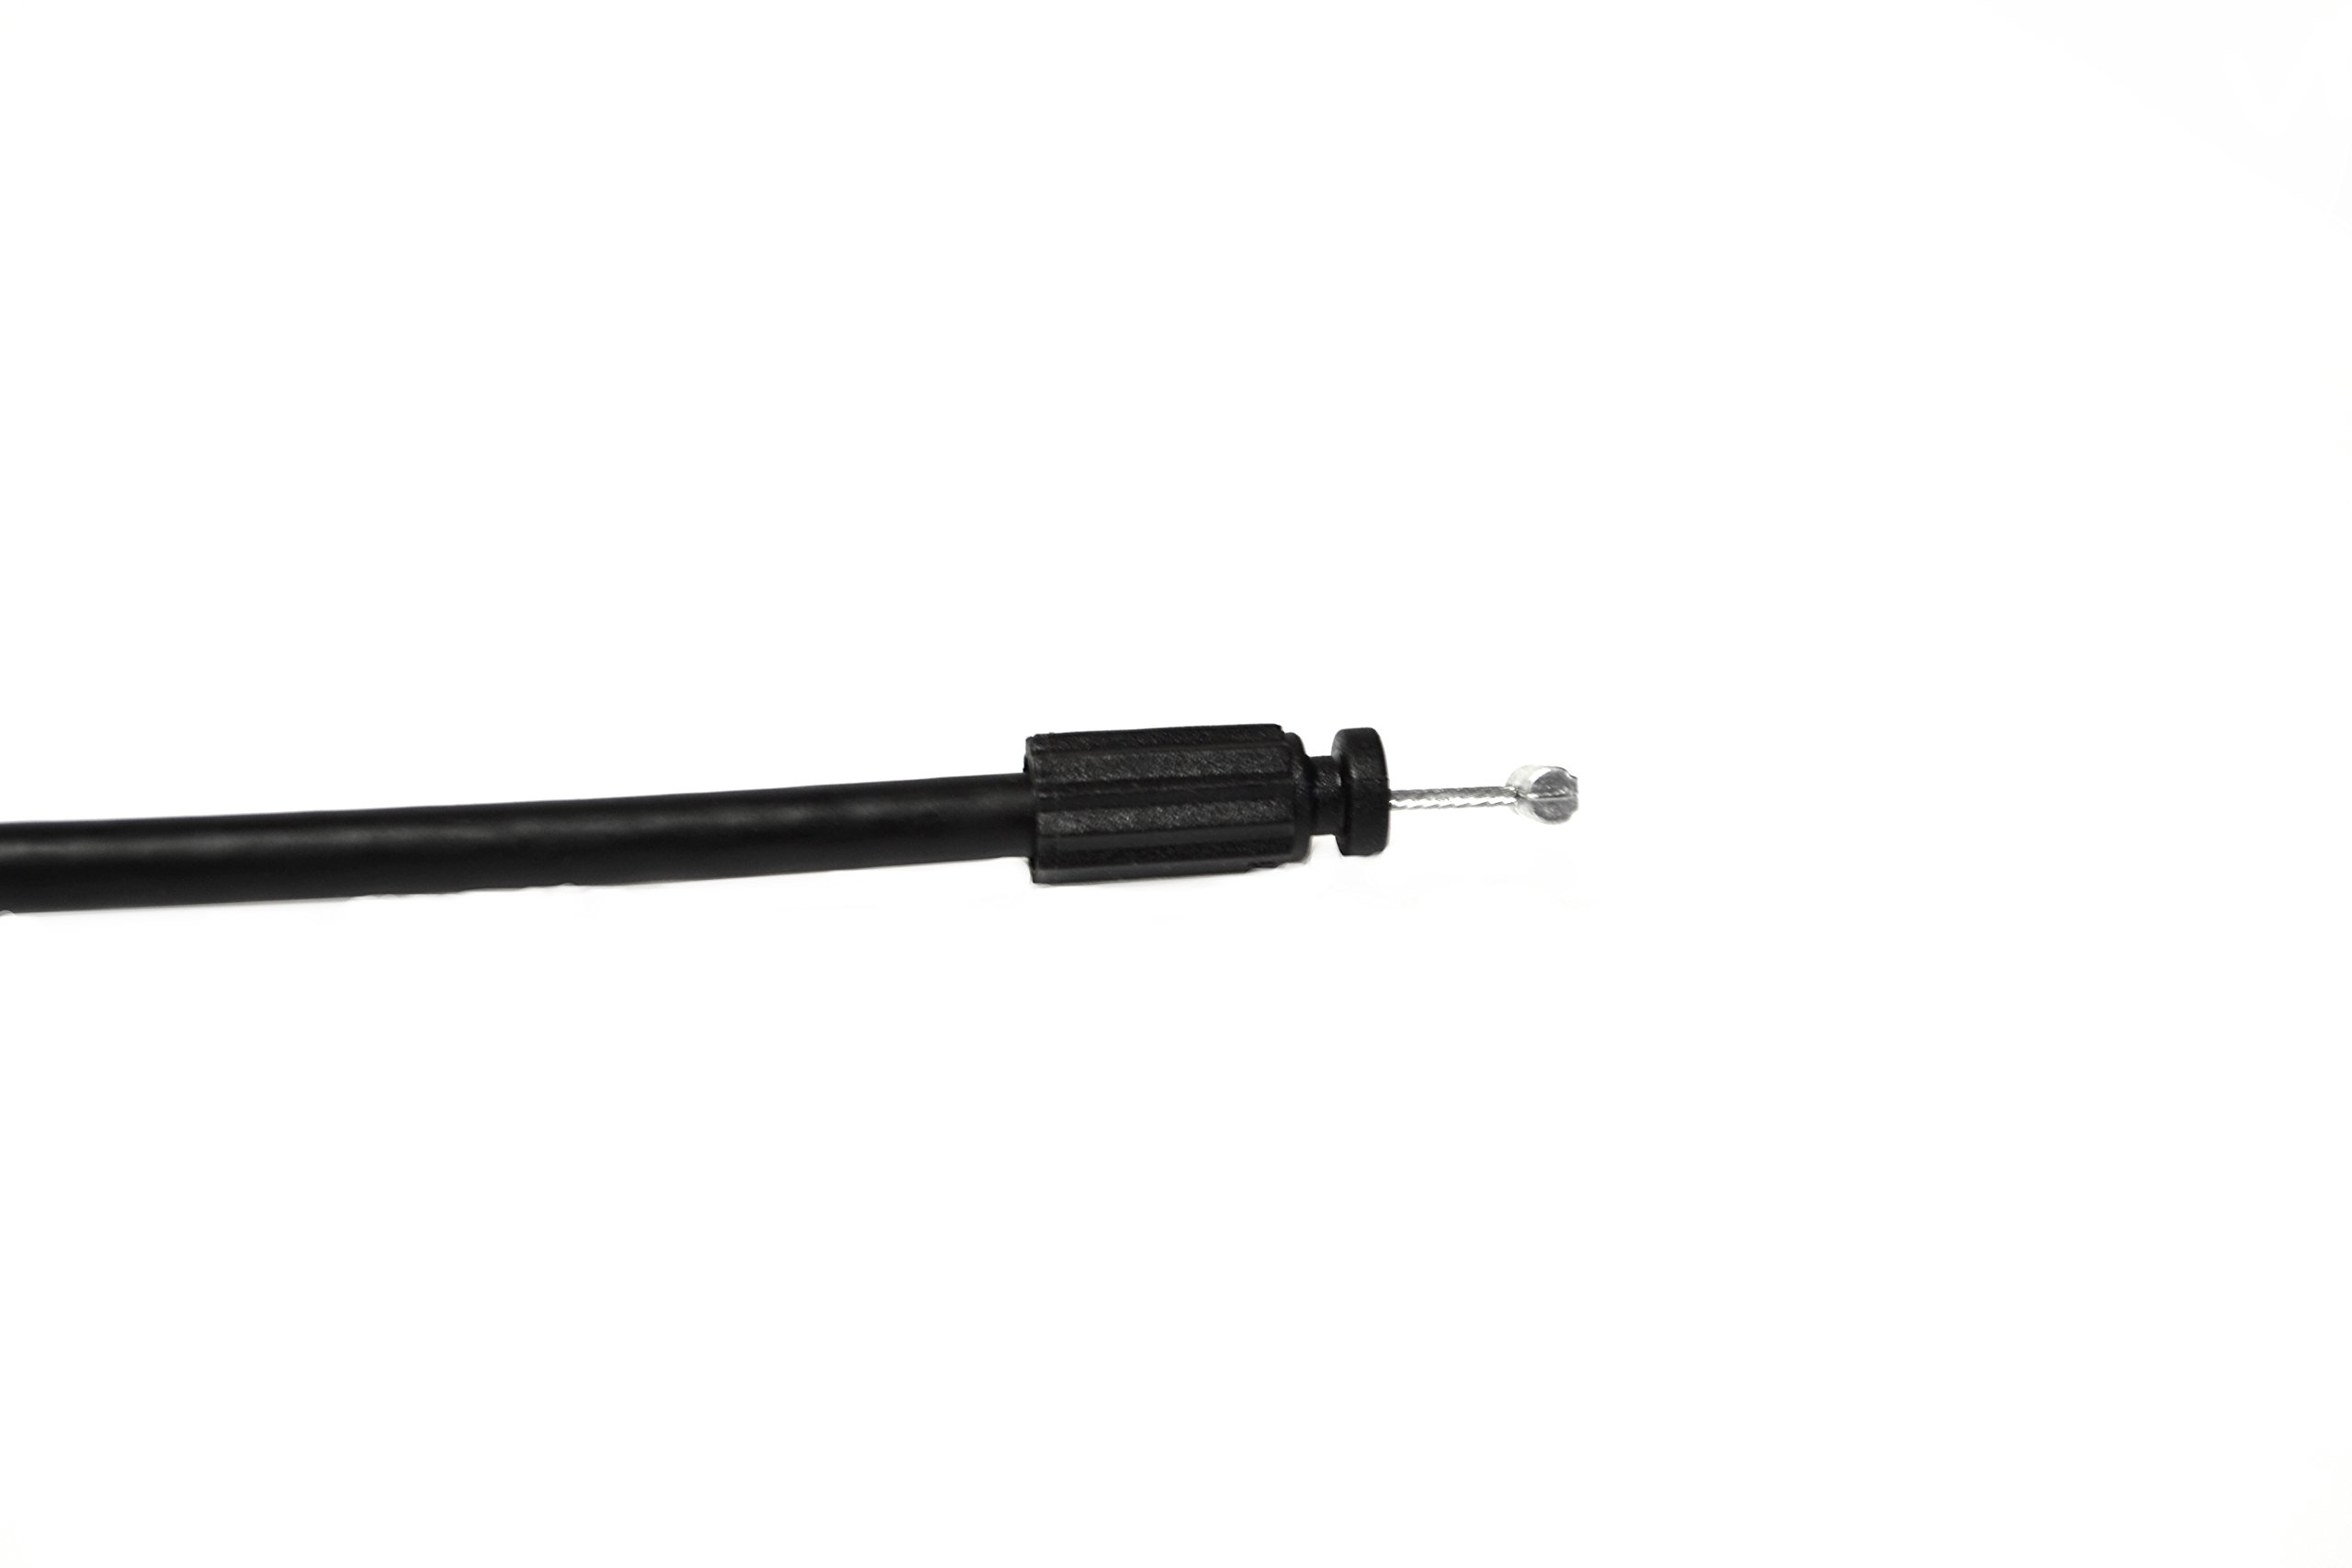 Recliner-Handles Replacement Cable 2.5" Exposed Wire, 3mm Barrel, 25.5" Overall Length with S-Tip